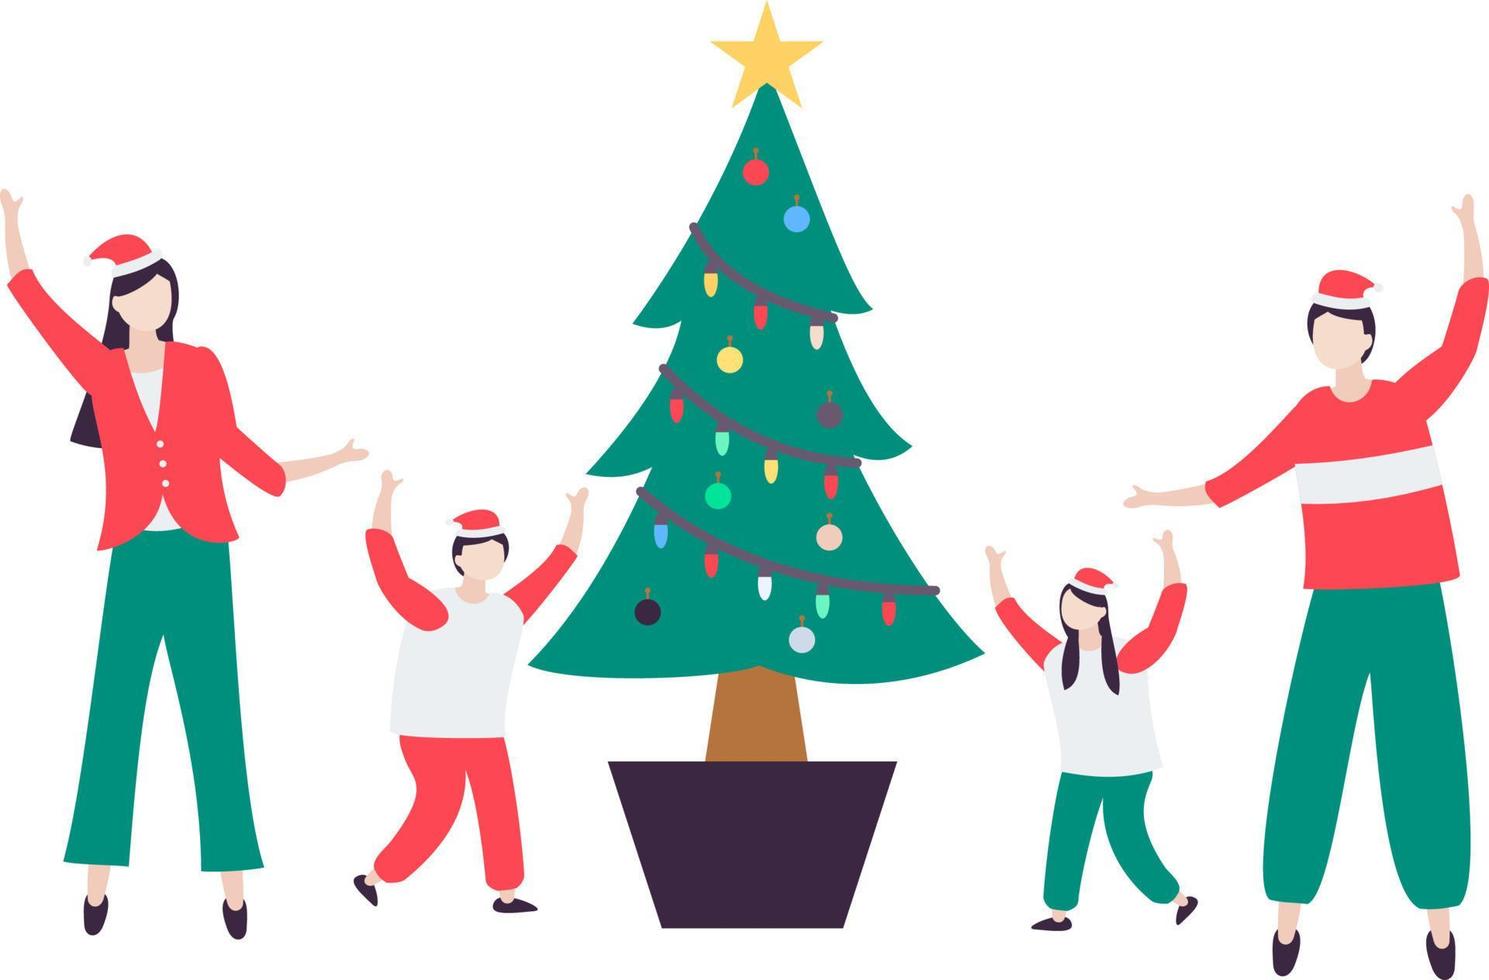 illustration of a family celebrating Christmas by decorating a Christmas tree vector